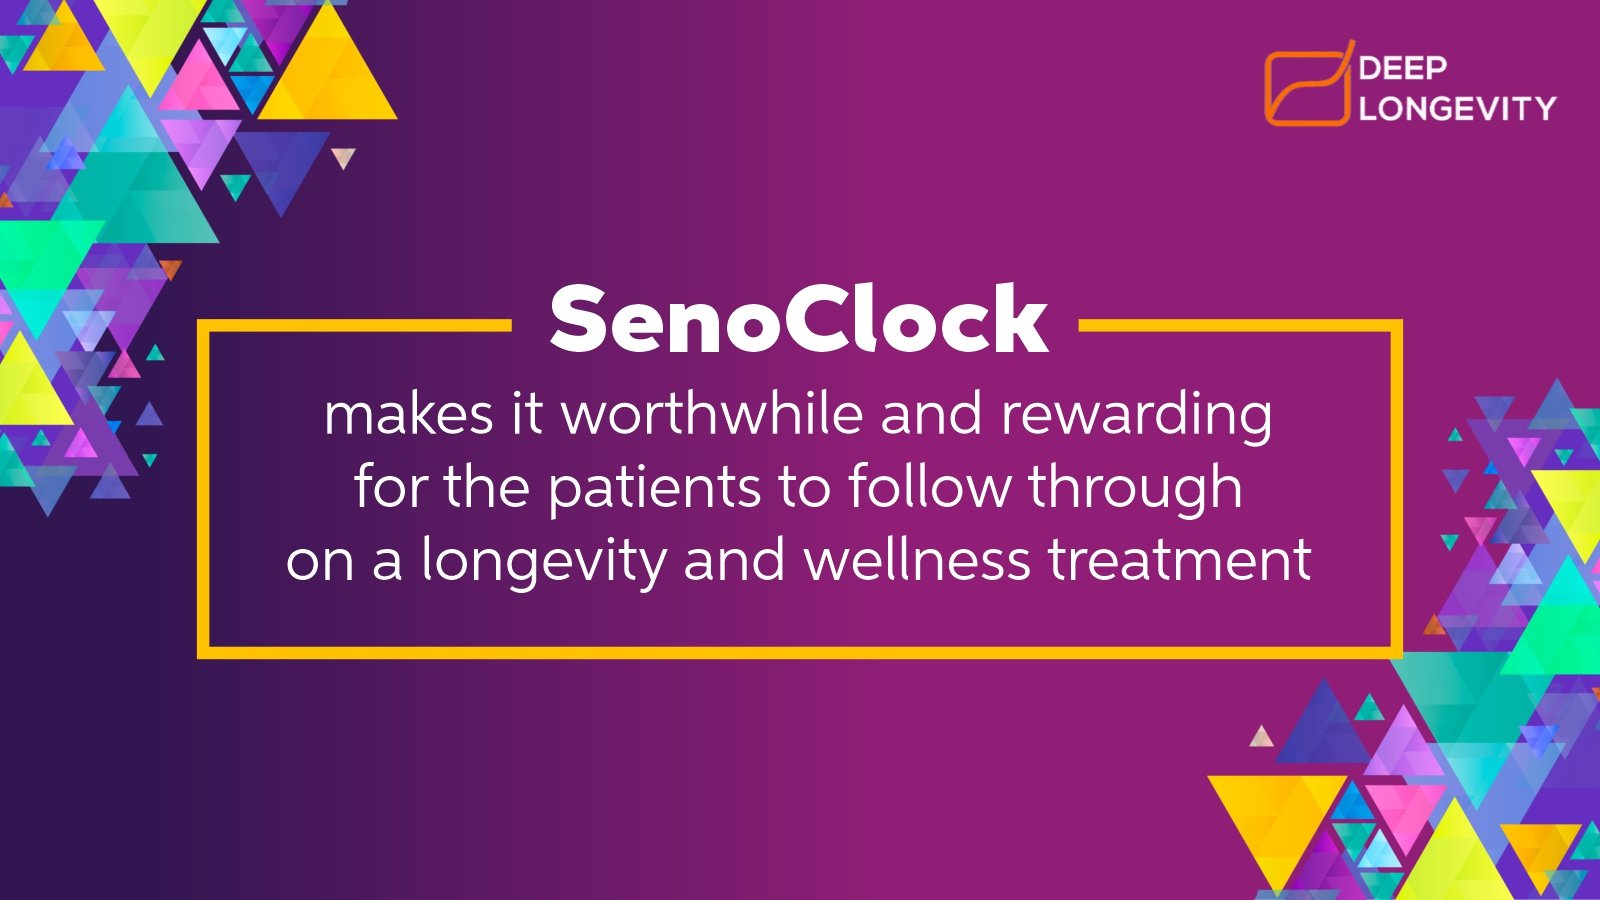 How longevity doctors can use SenoClock to extend human life